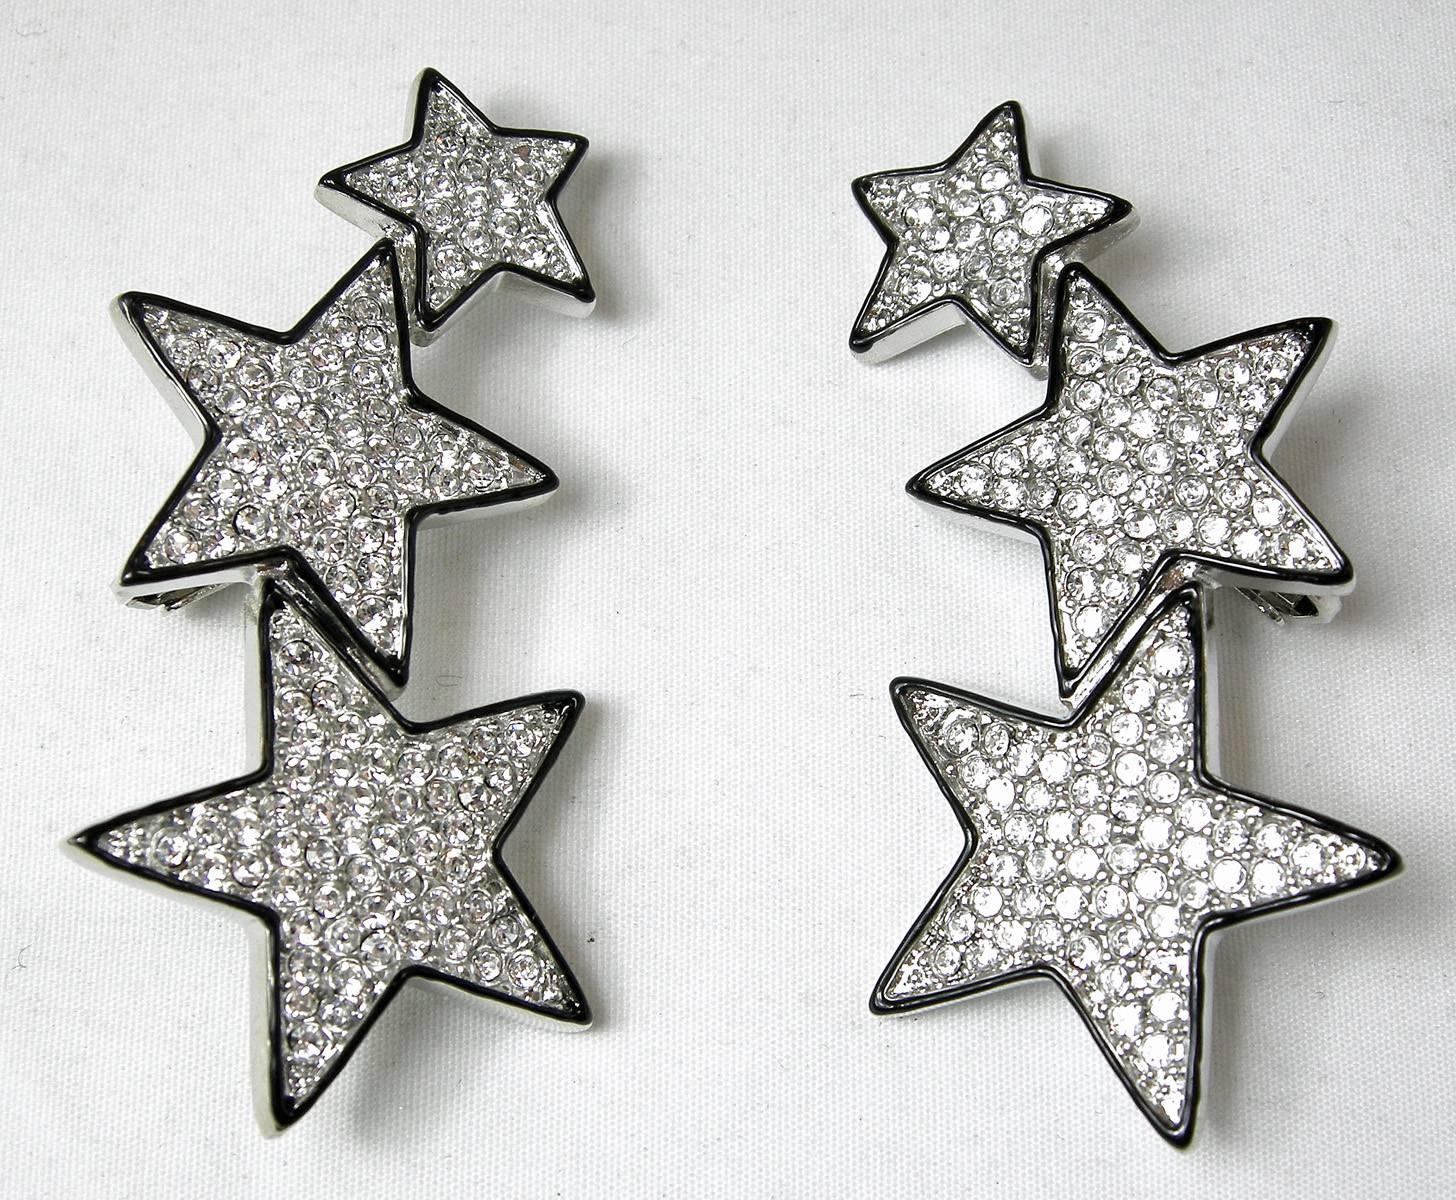 Stars are not only in the sky…but are fantastic on your ears.  These Kenneth Jay Lane star clip earrings have 3 stars graduating in size.  Each star is encrusted with rhinestones with black enamel borders.   They are nickel free and made with a